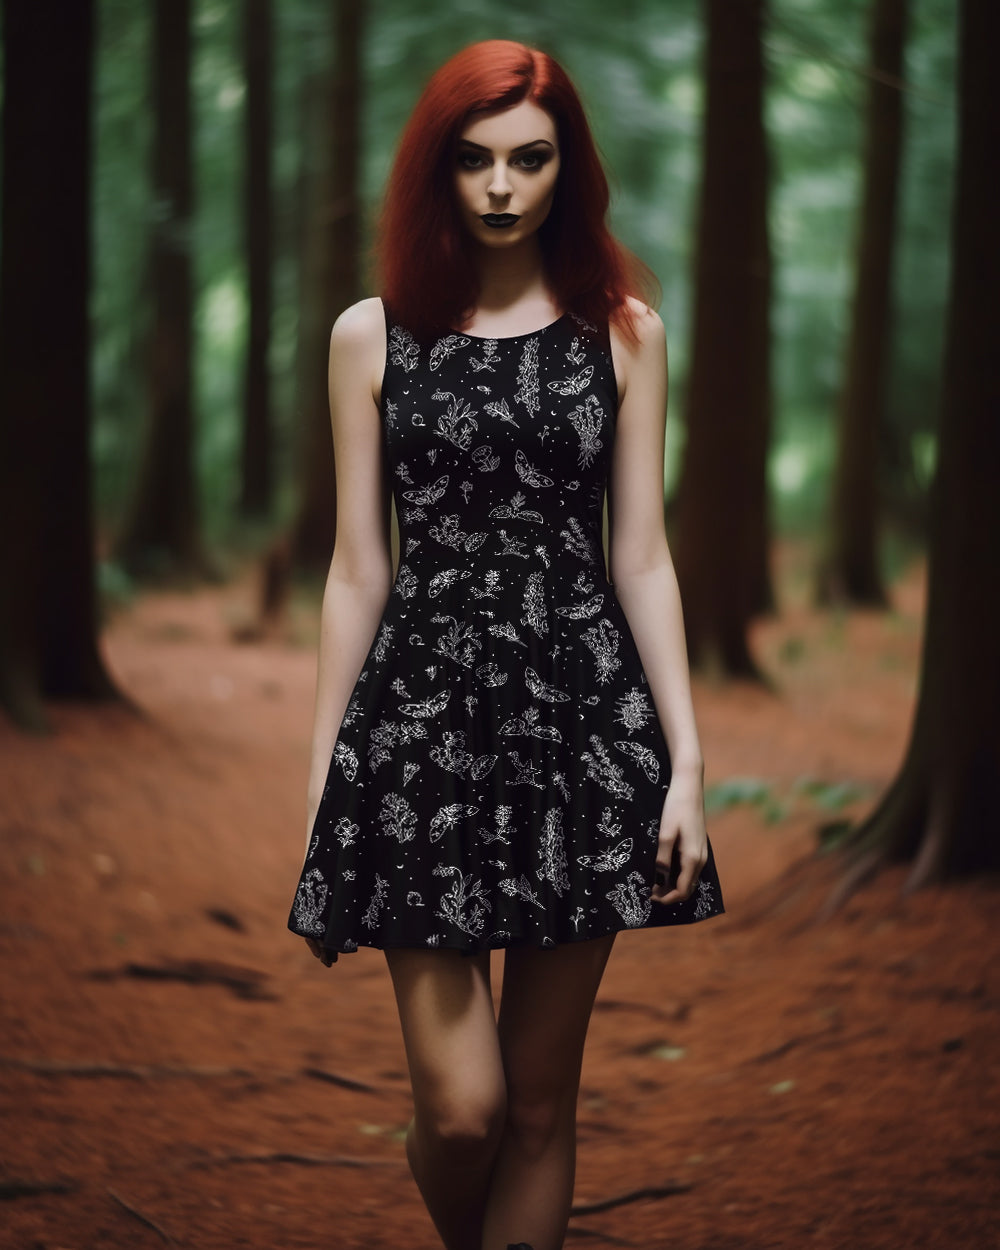 Nightshade Dress - Alternative Occult Ethical Fashion - UPF 50+ Protection from 98% of harmful rays - On Demand Eco-friendly Sustainable Product